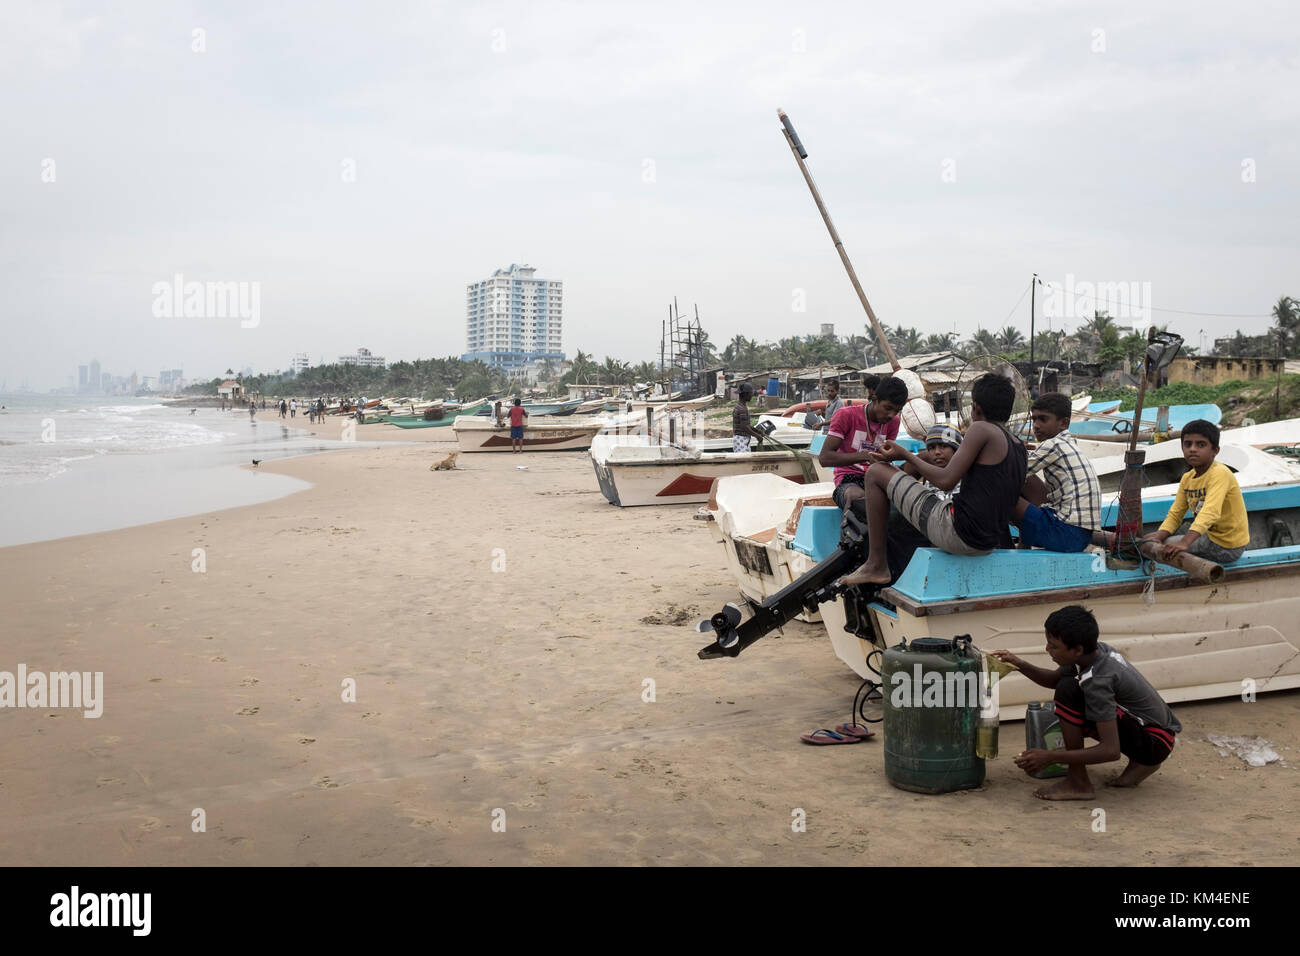 Fishermen tend to their boats on the beach in Colombo, Sri Lanka Stock Photo